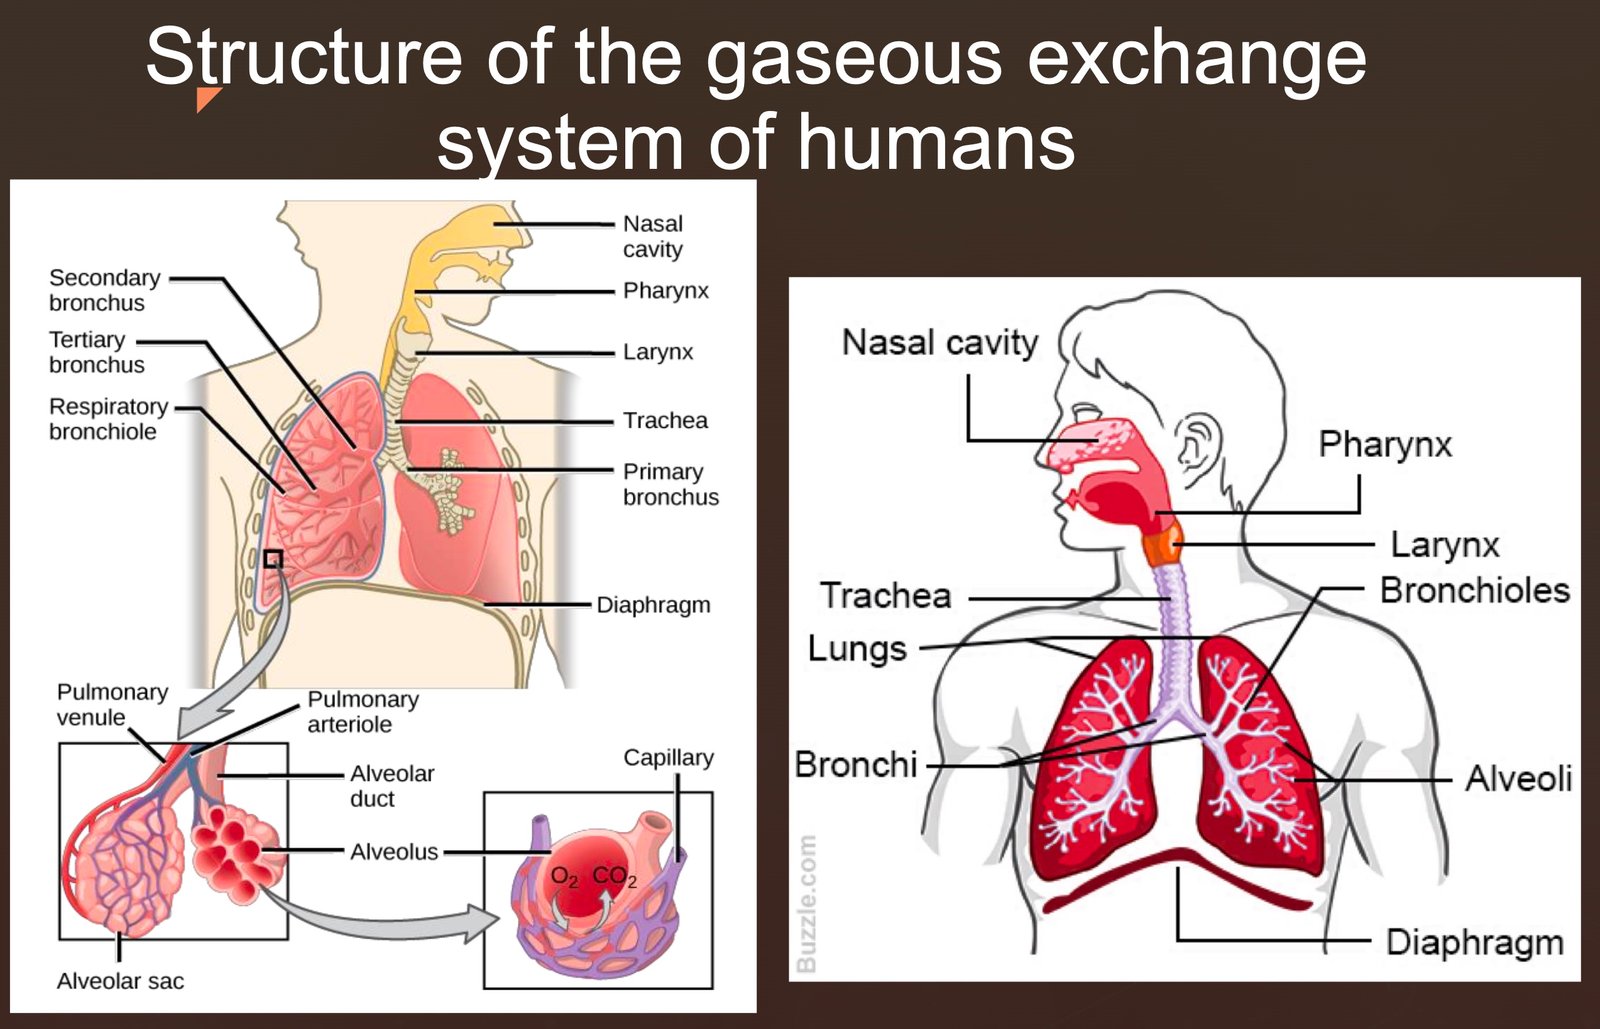 Structure of the gaseous exchange system of humans